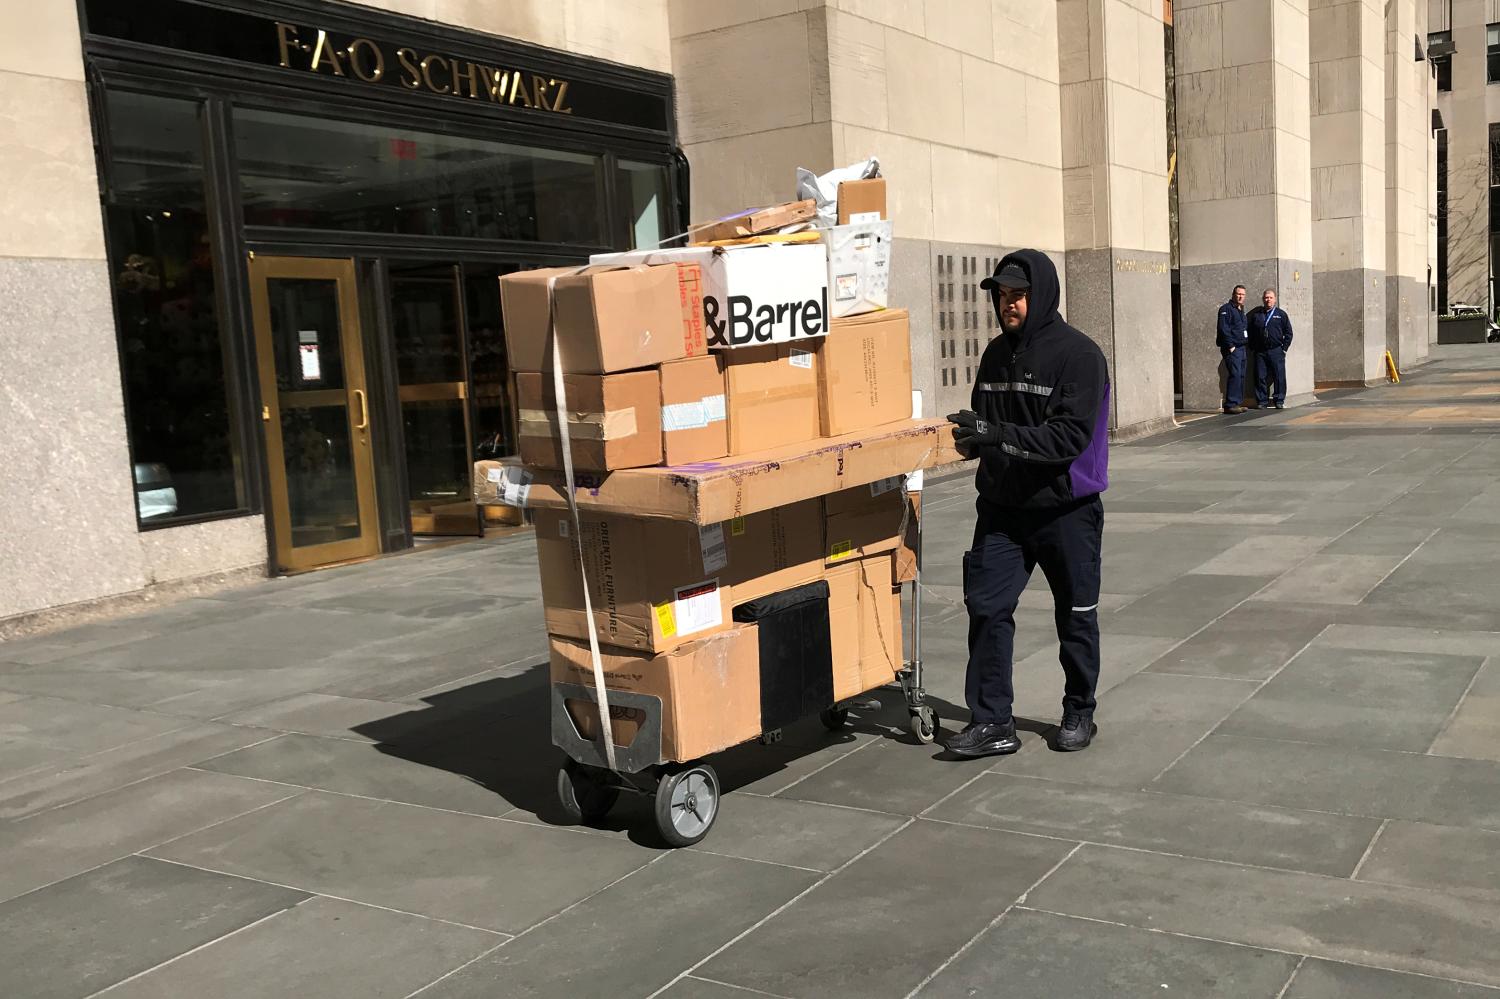 A worker delivers packages following the outbreak of coronavirus disease (COVID-19), in the Manhattan borough of New York City, New York, U.S., March 16, 2020. REUTERS/Carlo Allegri